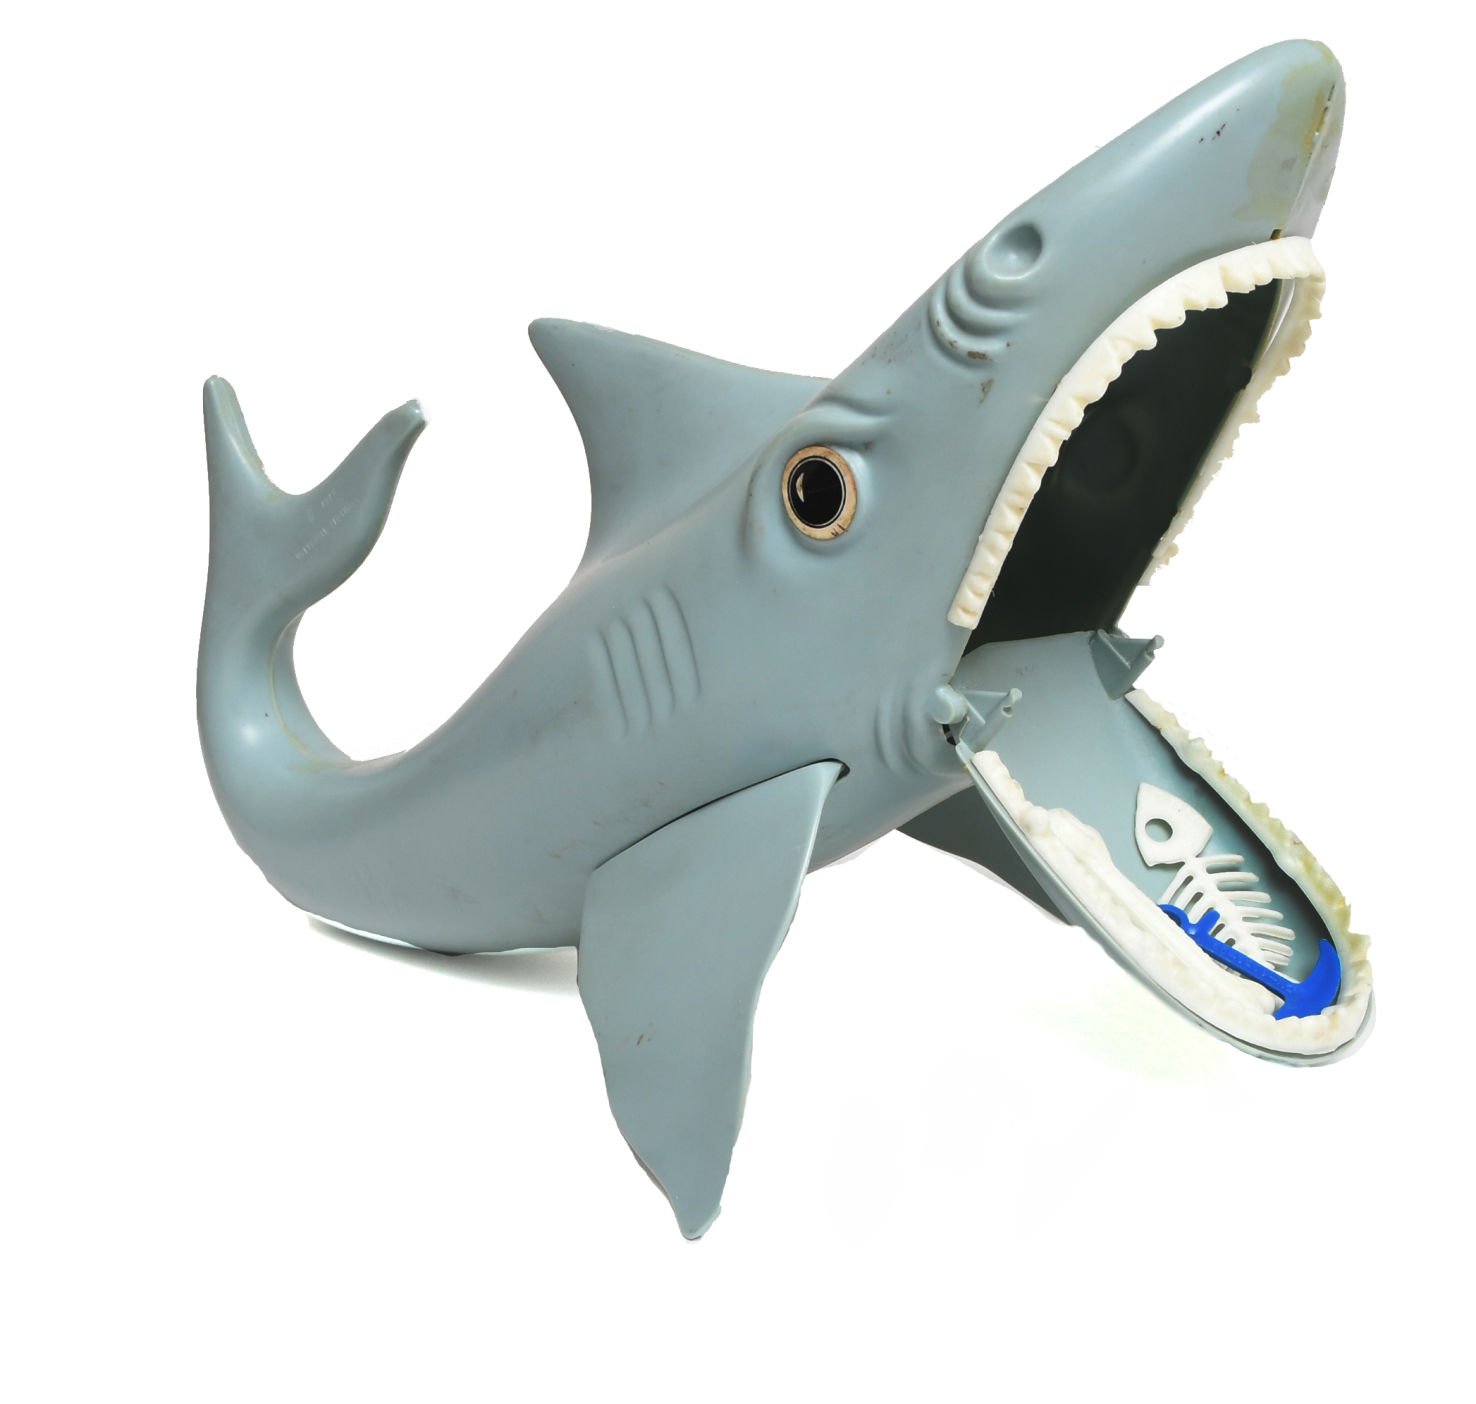 snapping shark toy